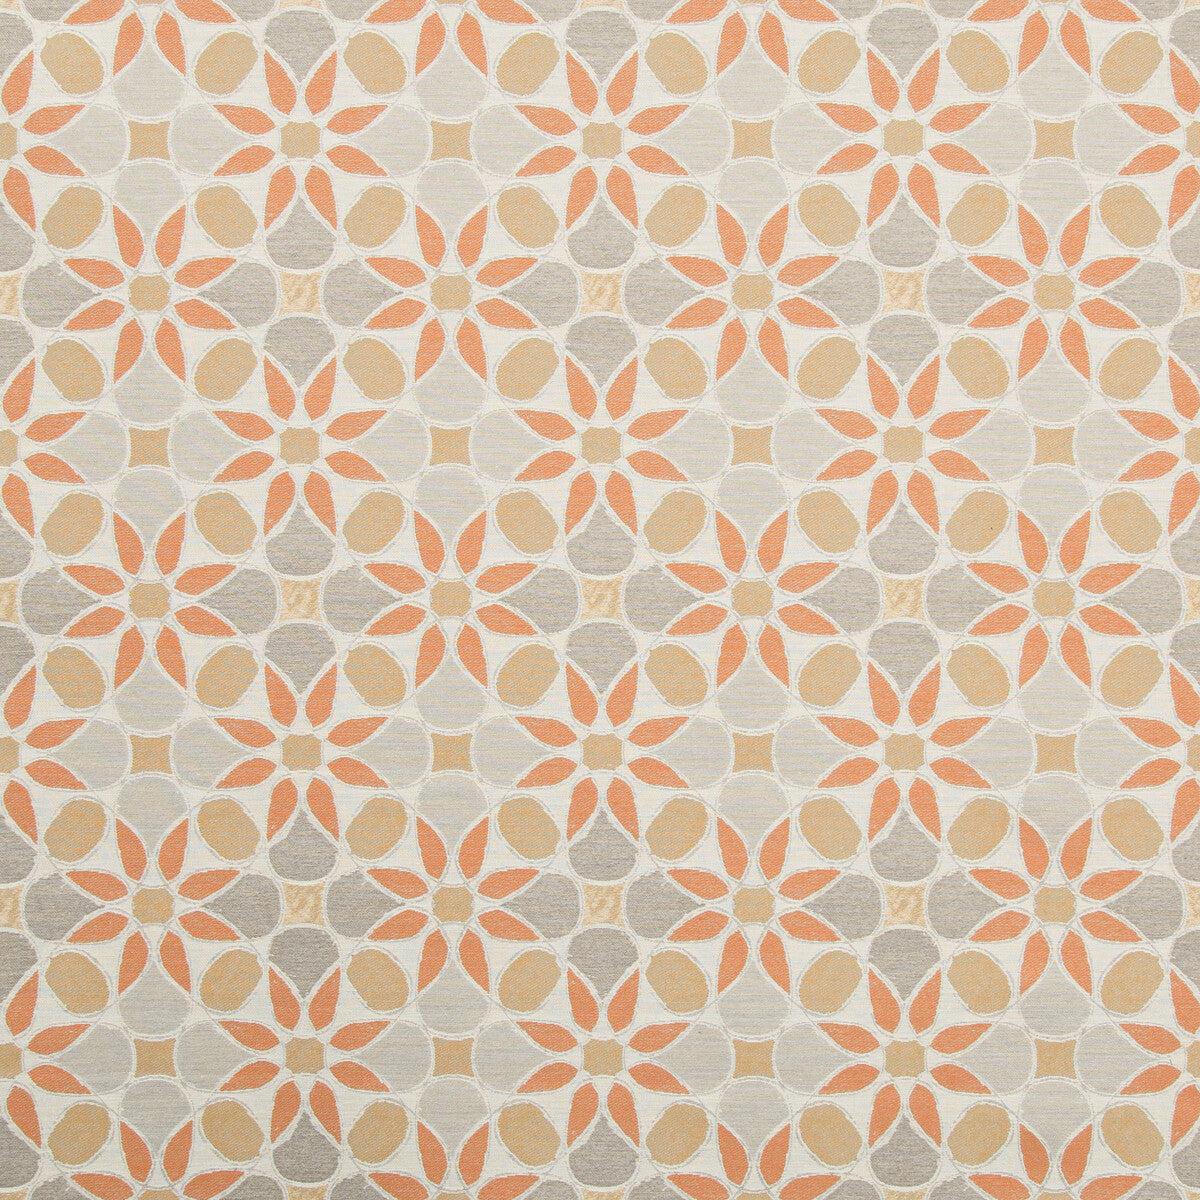 Tiepolo fabric in spice color - pattern 35882.24.0 - by Kravet Contract in the Gis Crypton Green collection